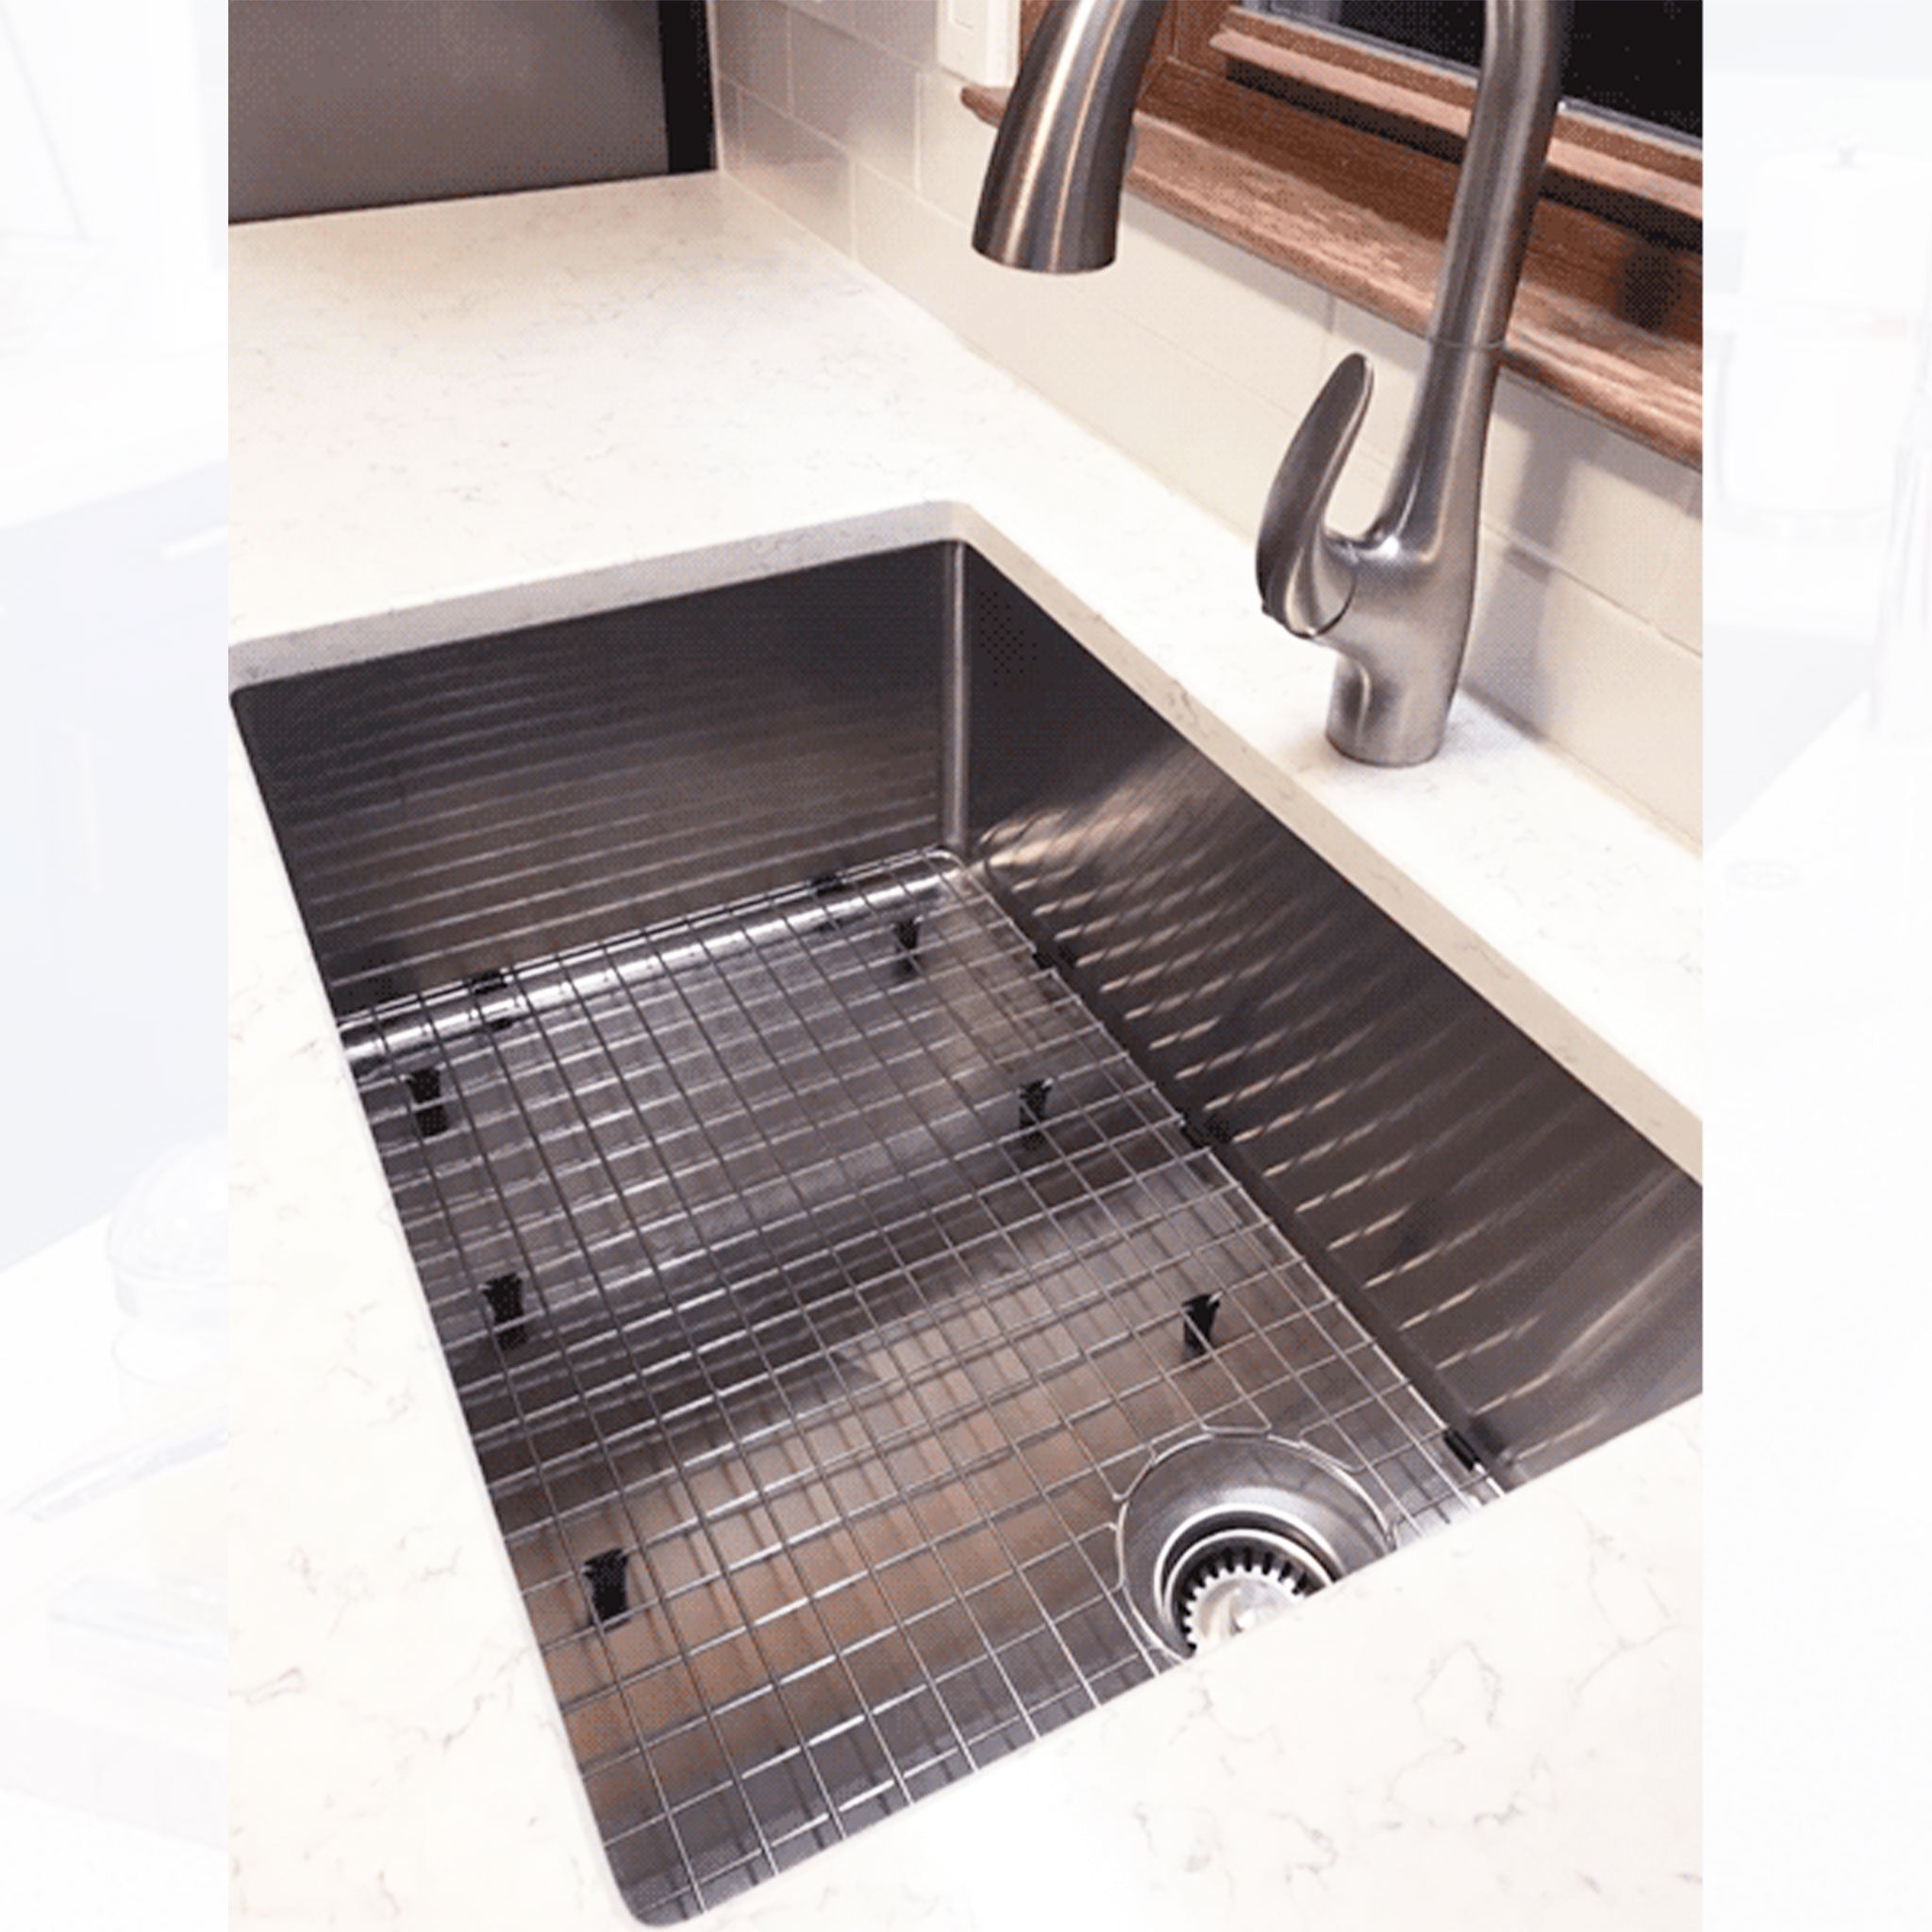 Create Good Sinks' seamless drain with a protective grid in a 28", classica-style kitchen sink.